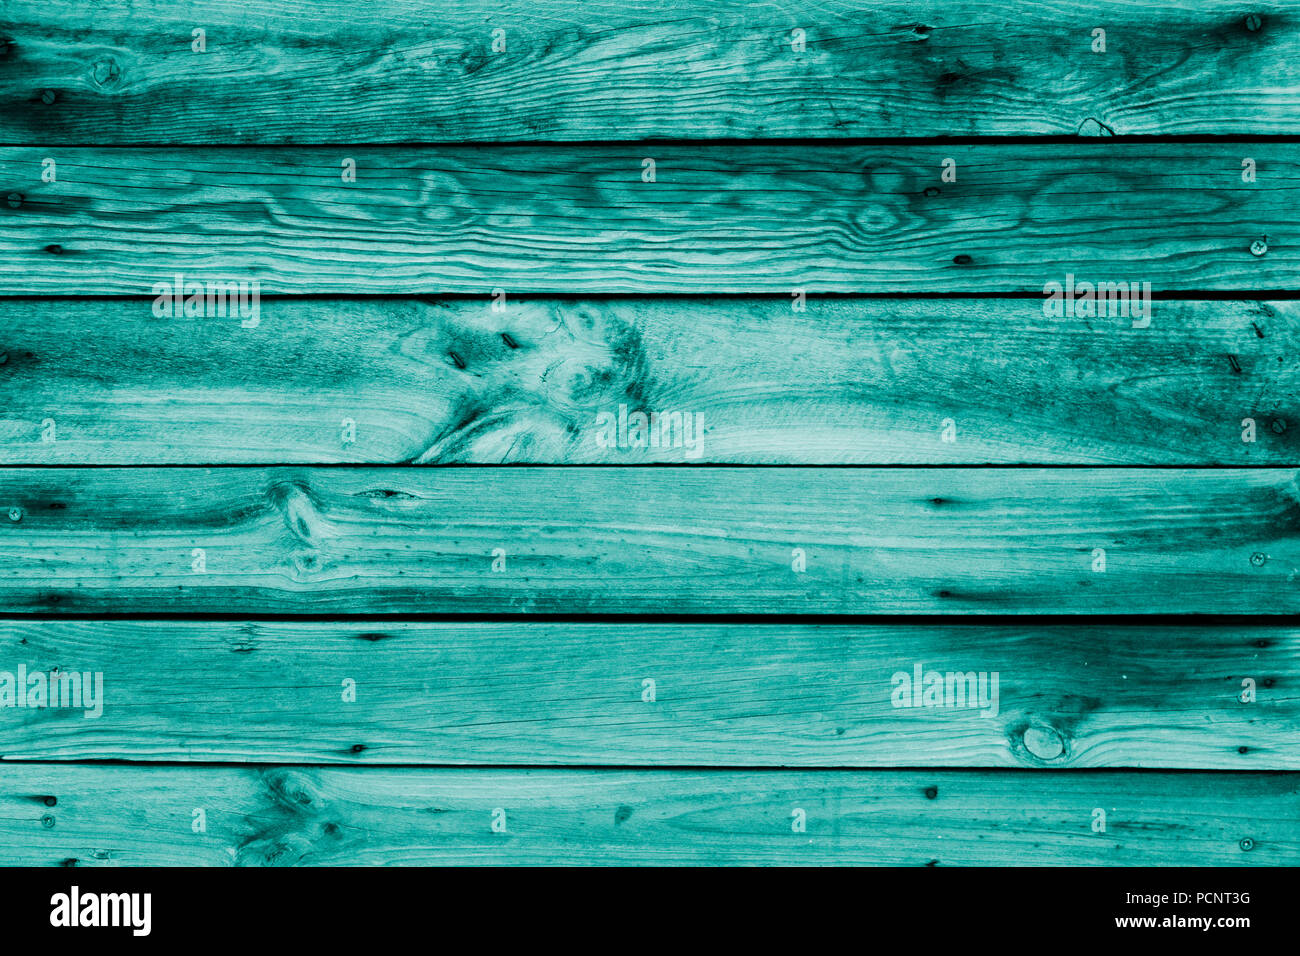 Close-up of the surface (wall, floor or overhead) made of wooden plank, panel or board in the turquoise, teal blue shade Stock Photo